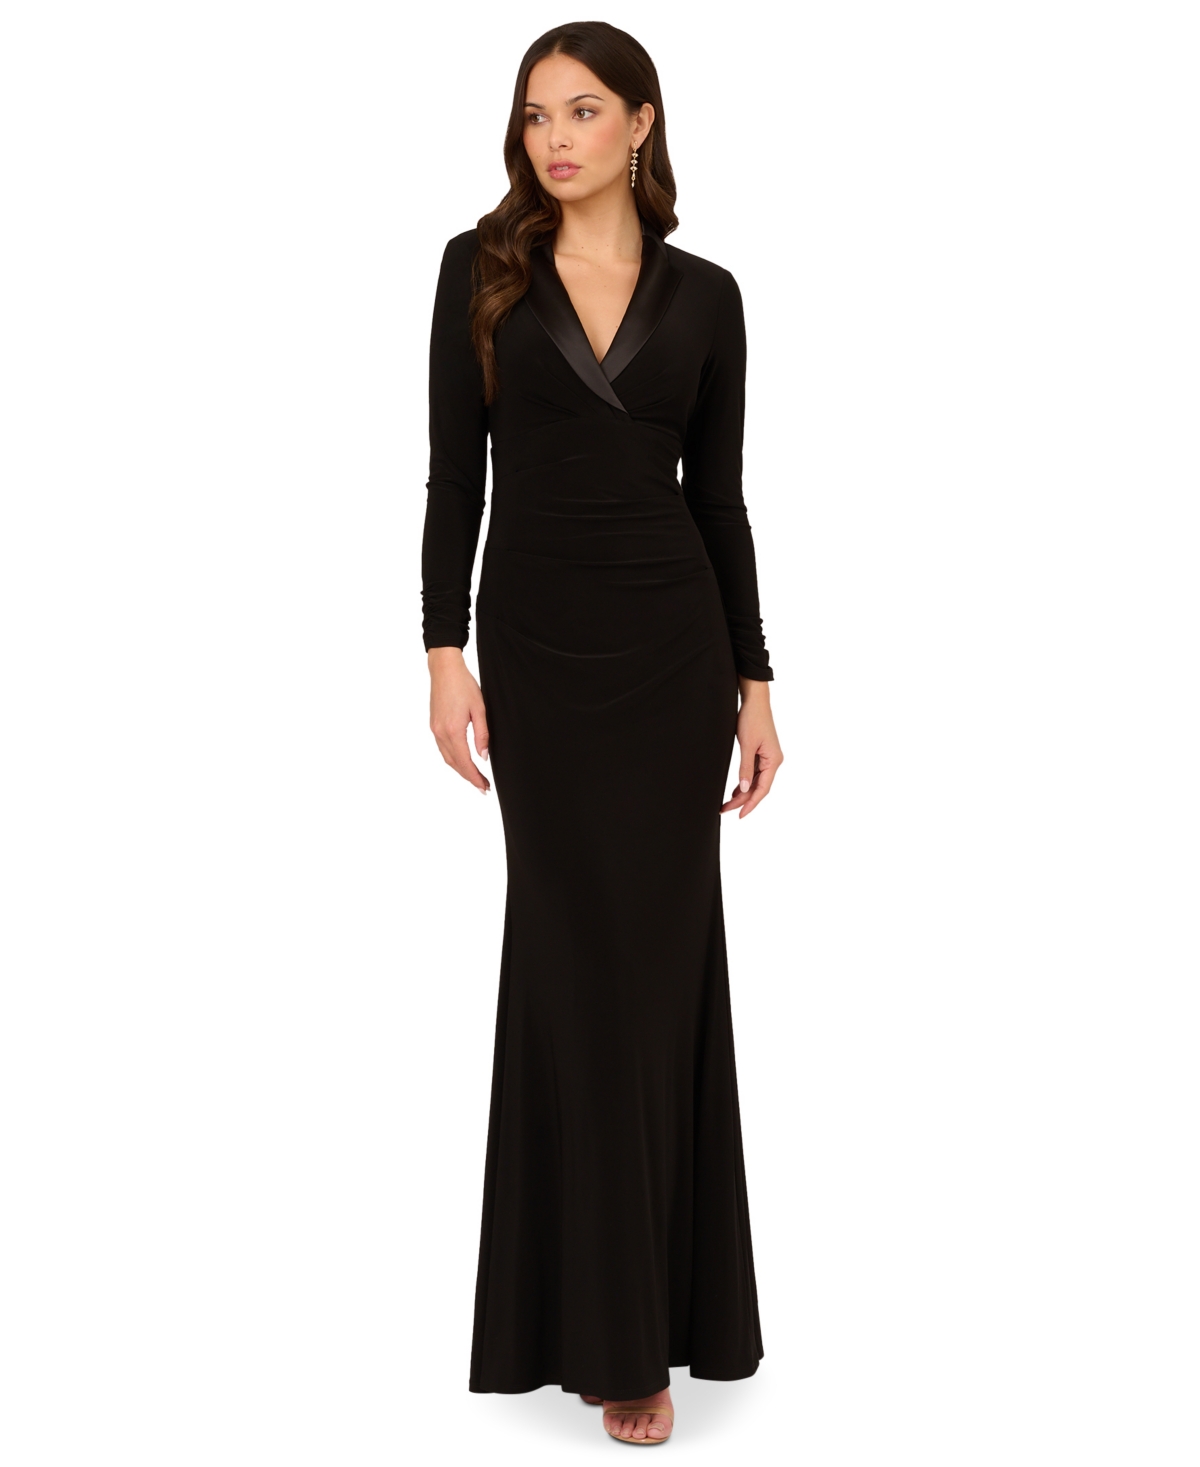 Adrianna Papell Adrainna Papell Women's Long-sleeve Tuxedo Gown In Black